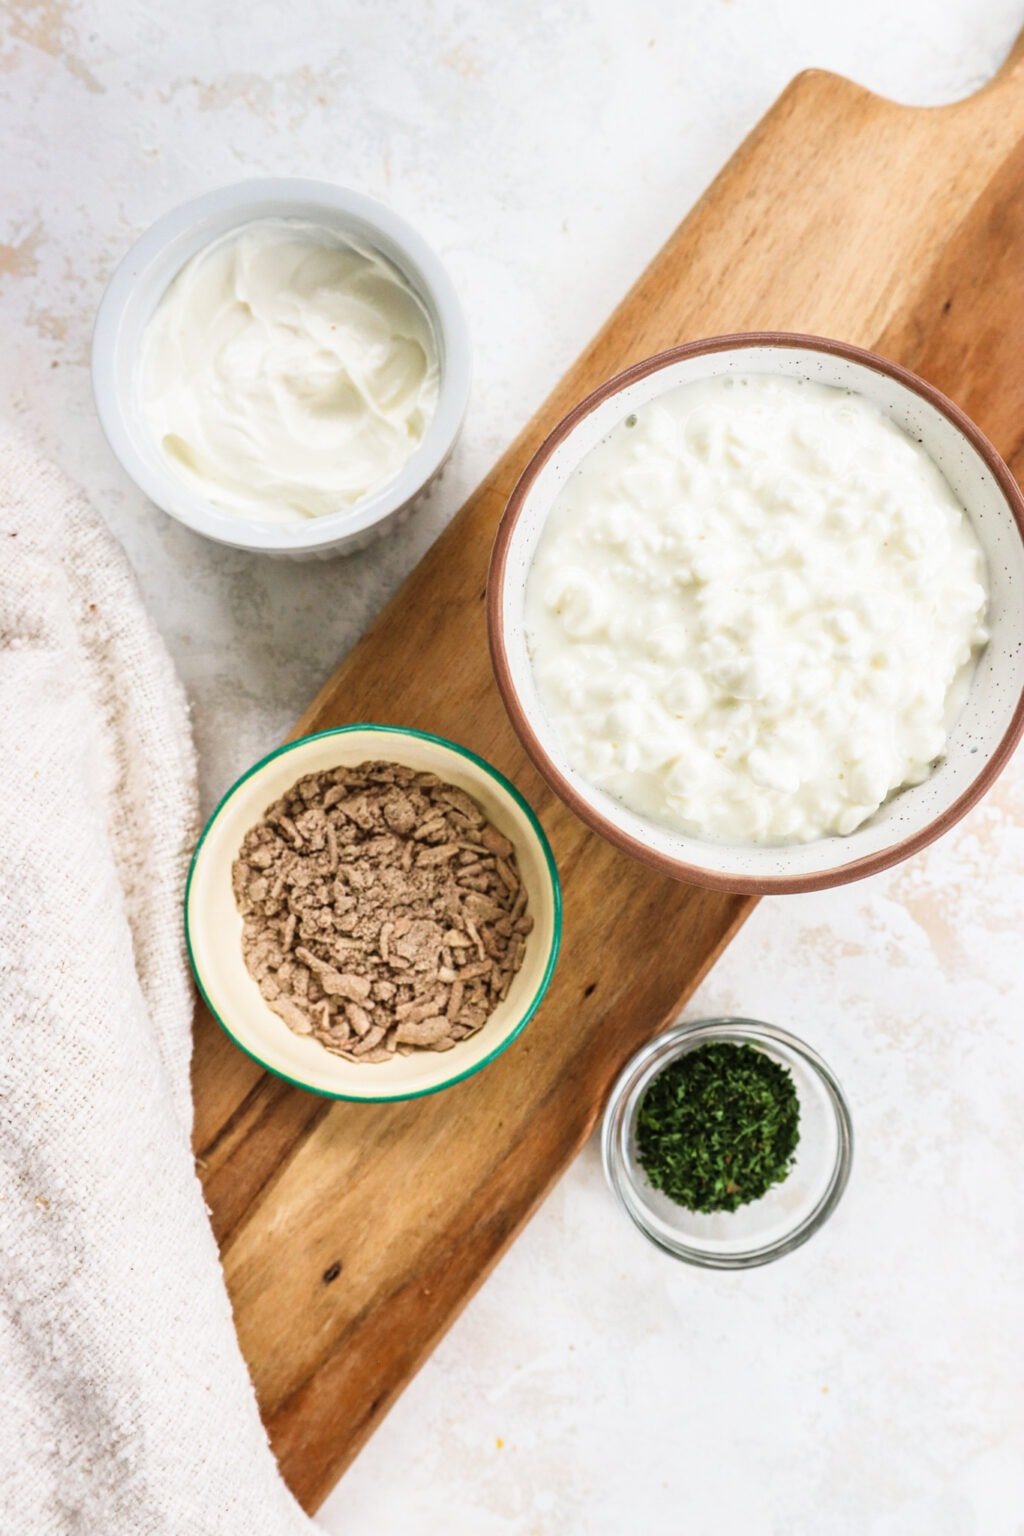 Small bowls holding ingredients for a french onion cottage cheese dip. Ingredients include cottage cheese, sour cream, french onion soup mix, and dried parsley